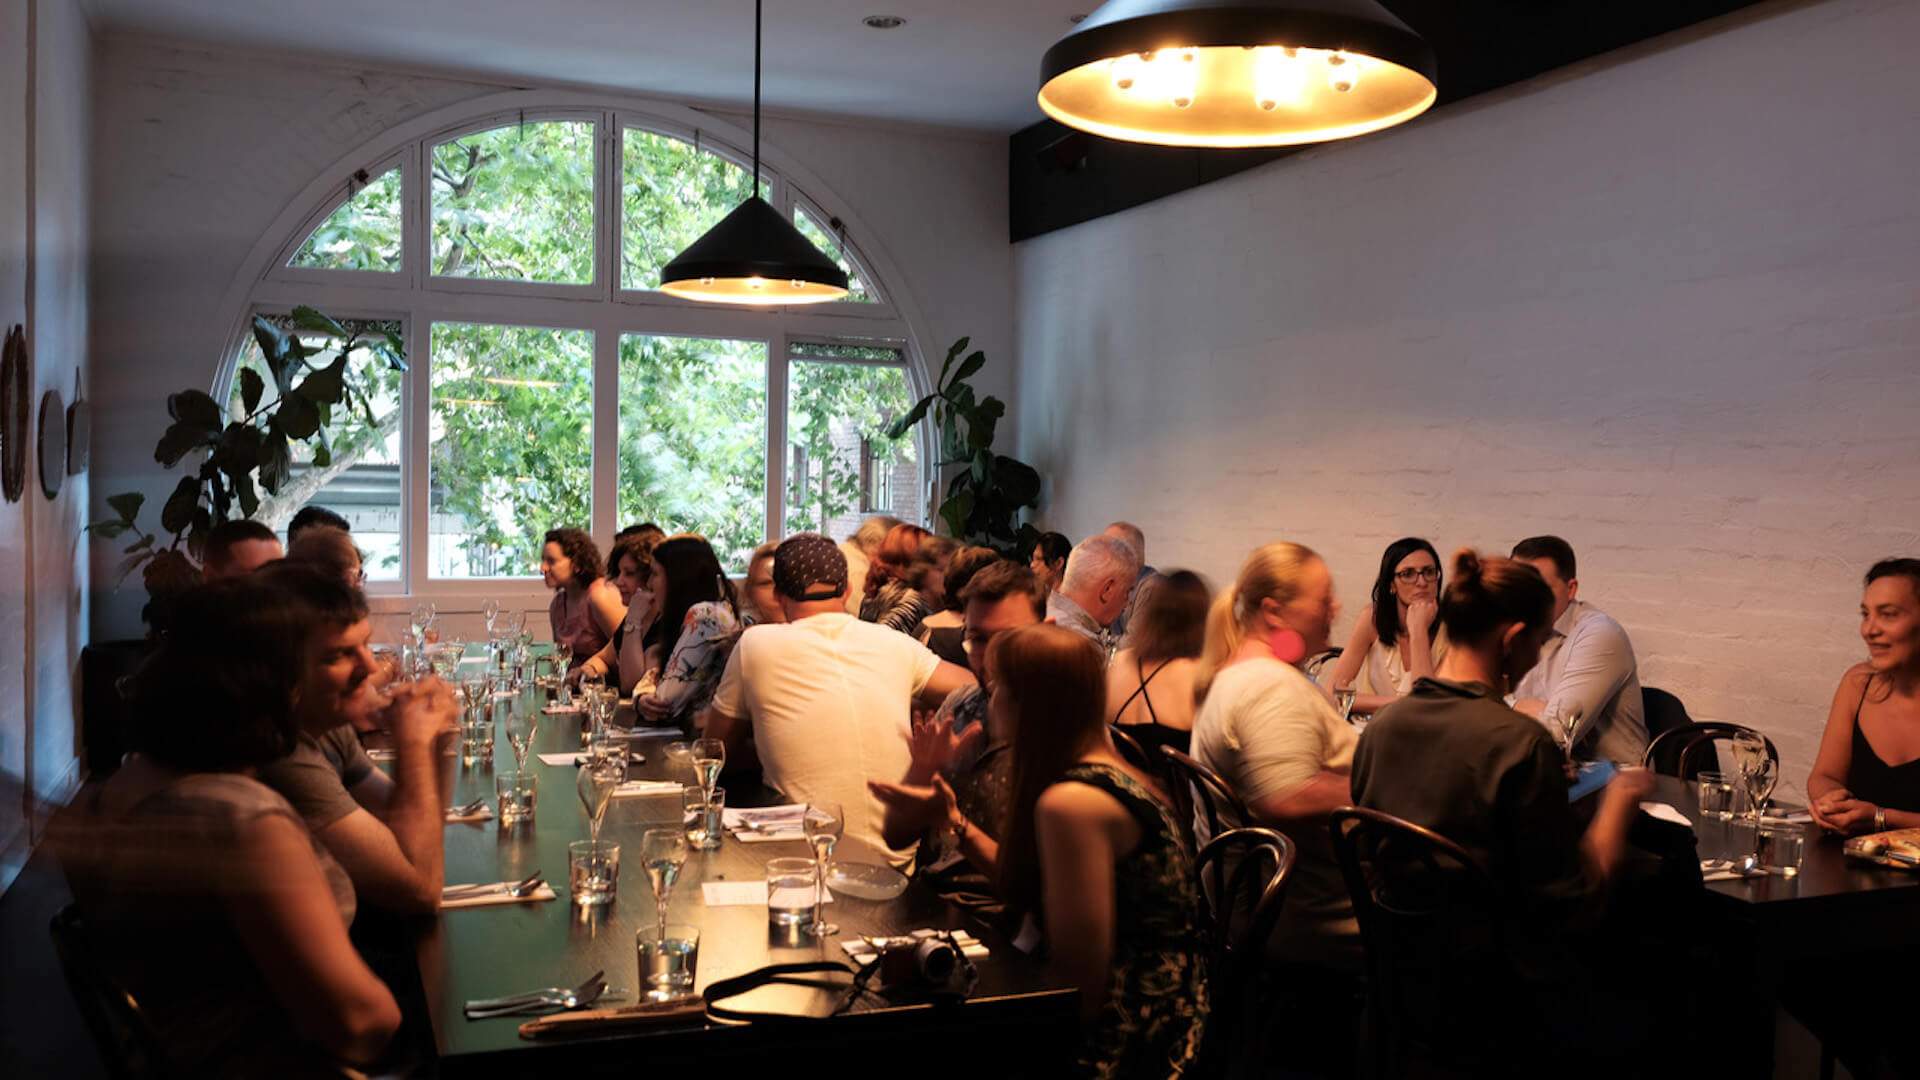 Bar Lourinha - home to one of the best private dining rooms in Melbourne.